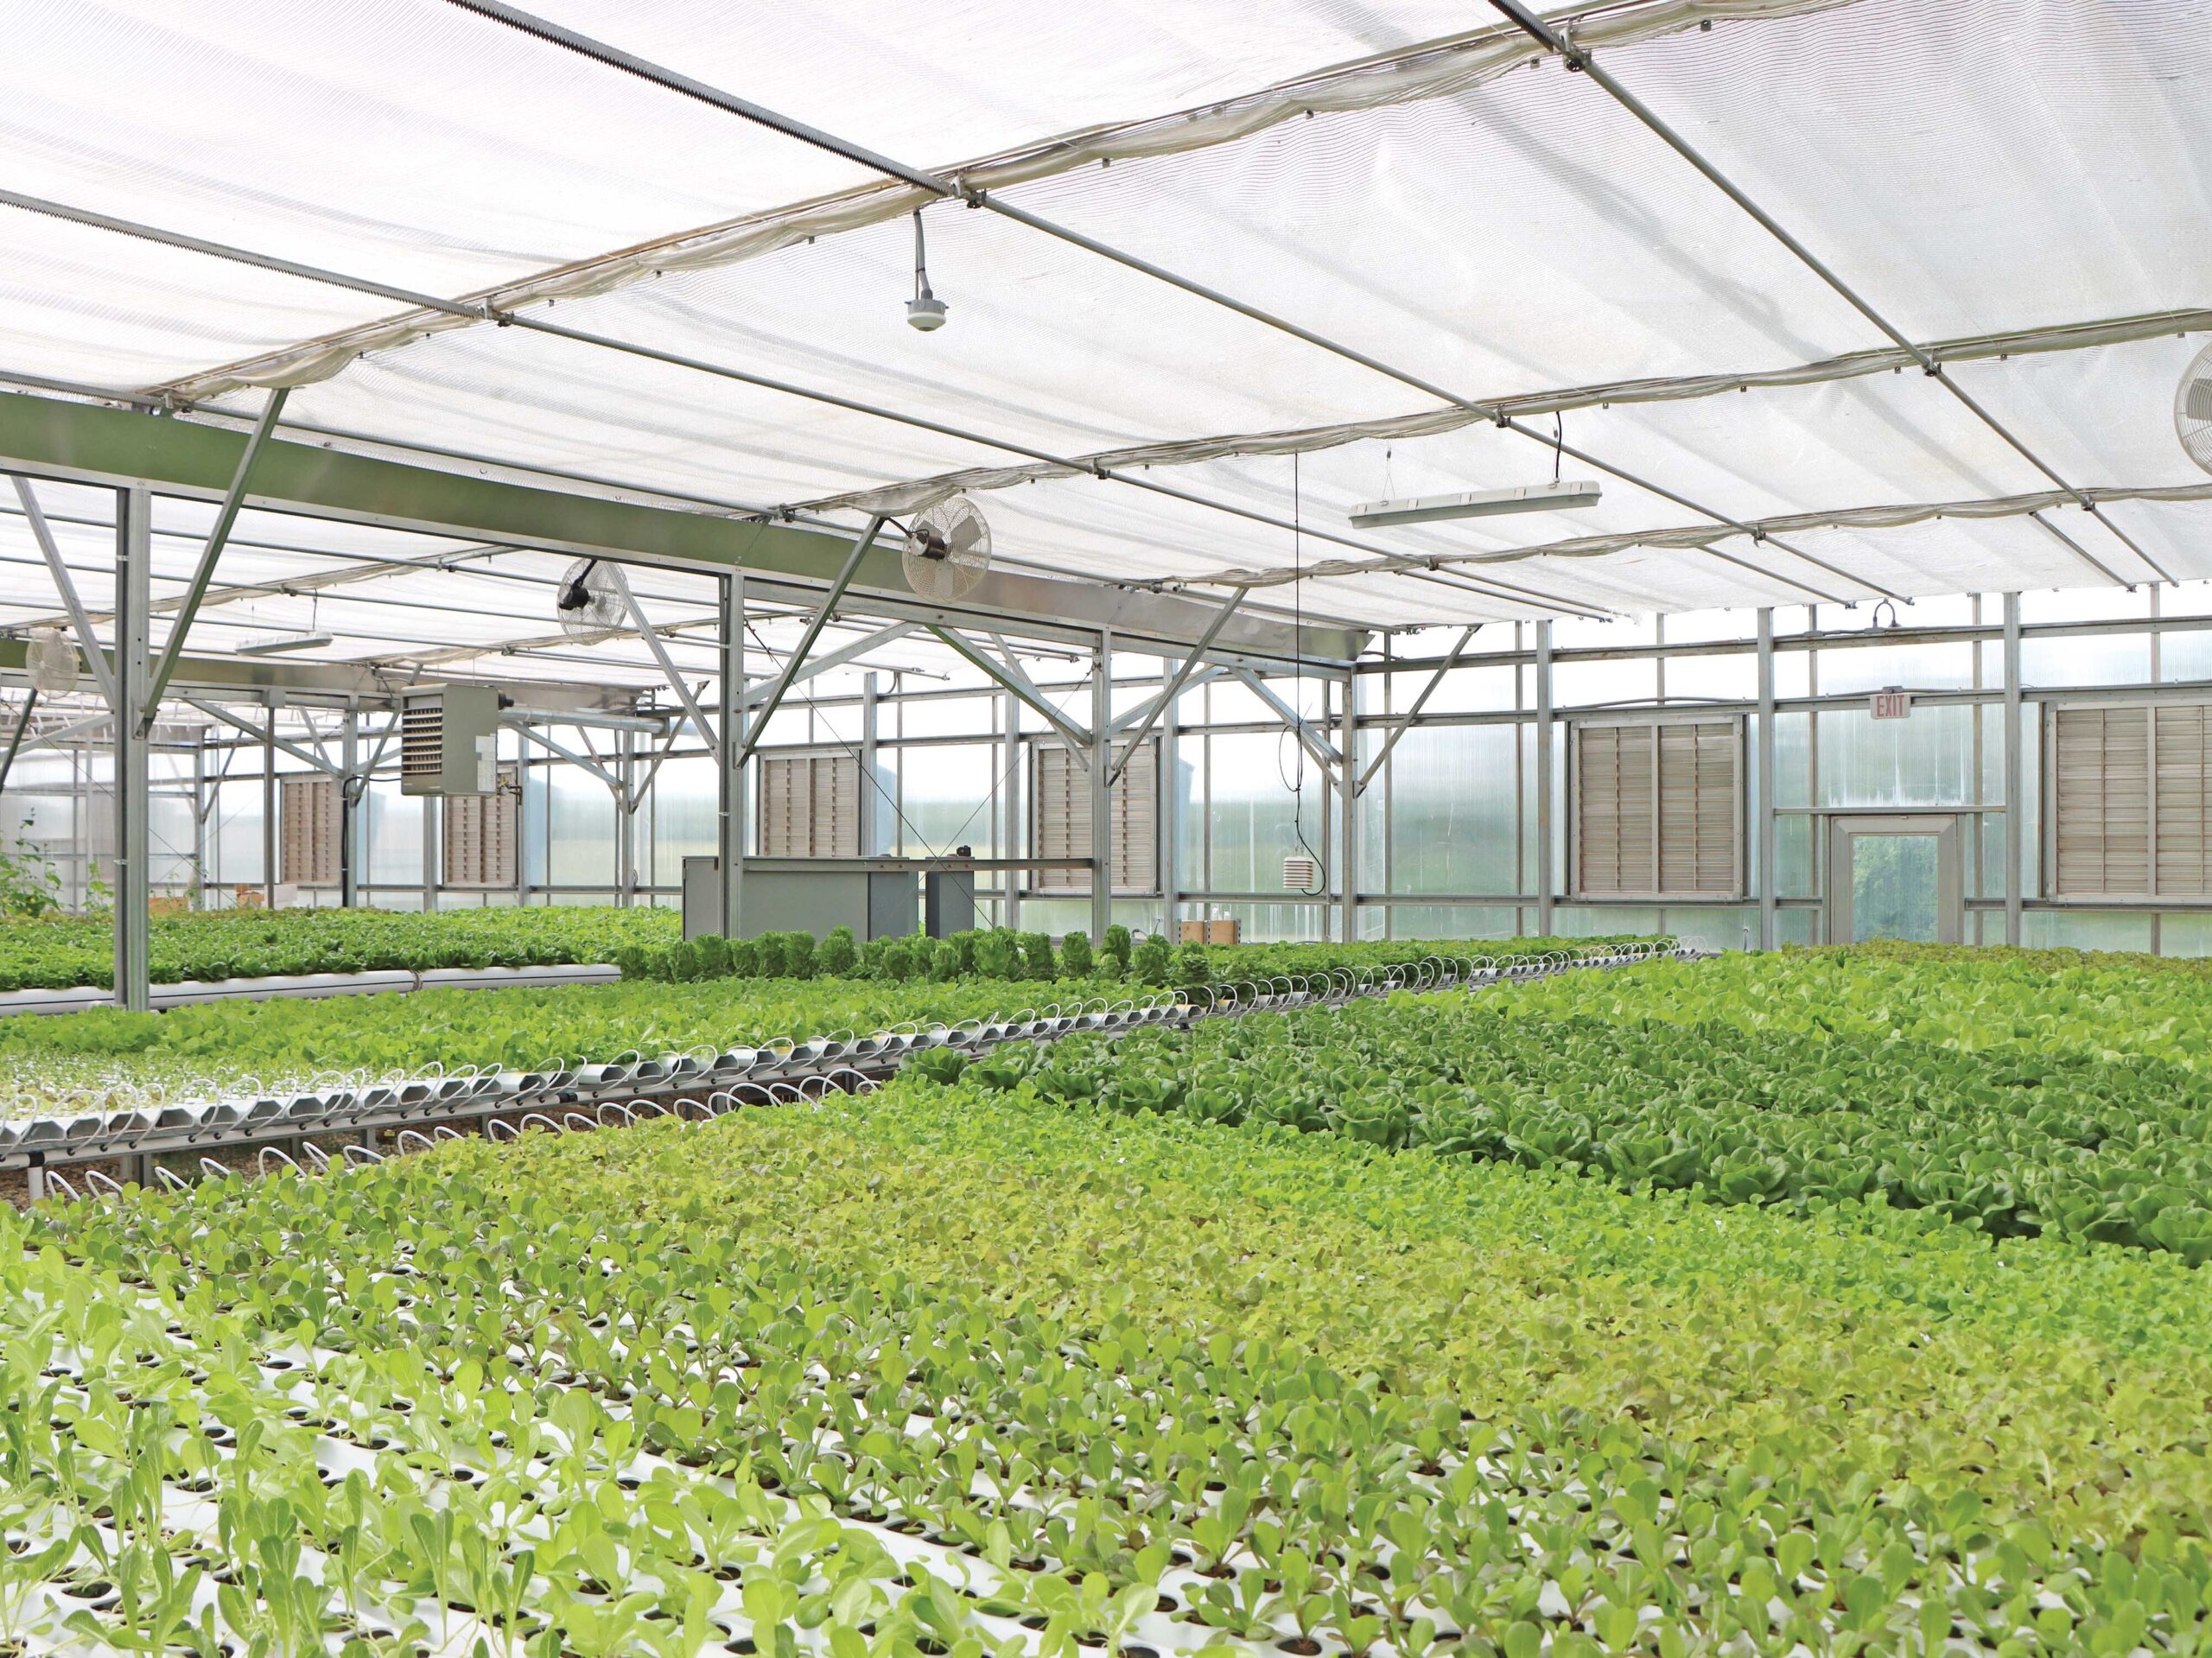 hydroponic vegetables inside of greenhouse